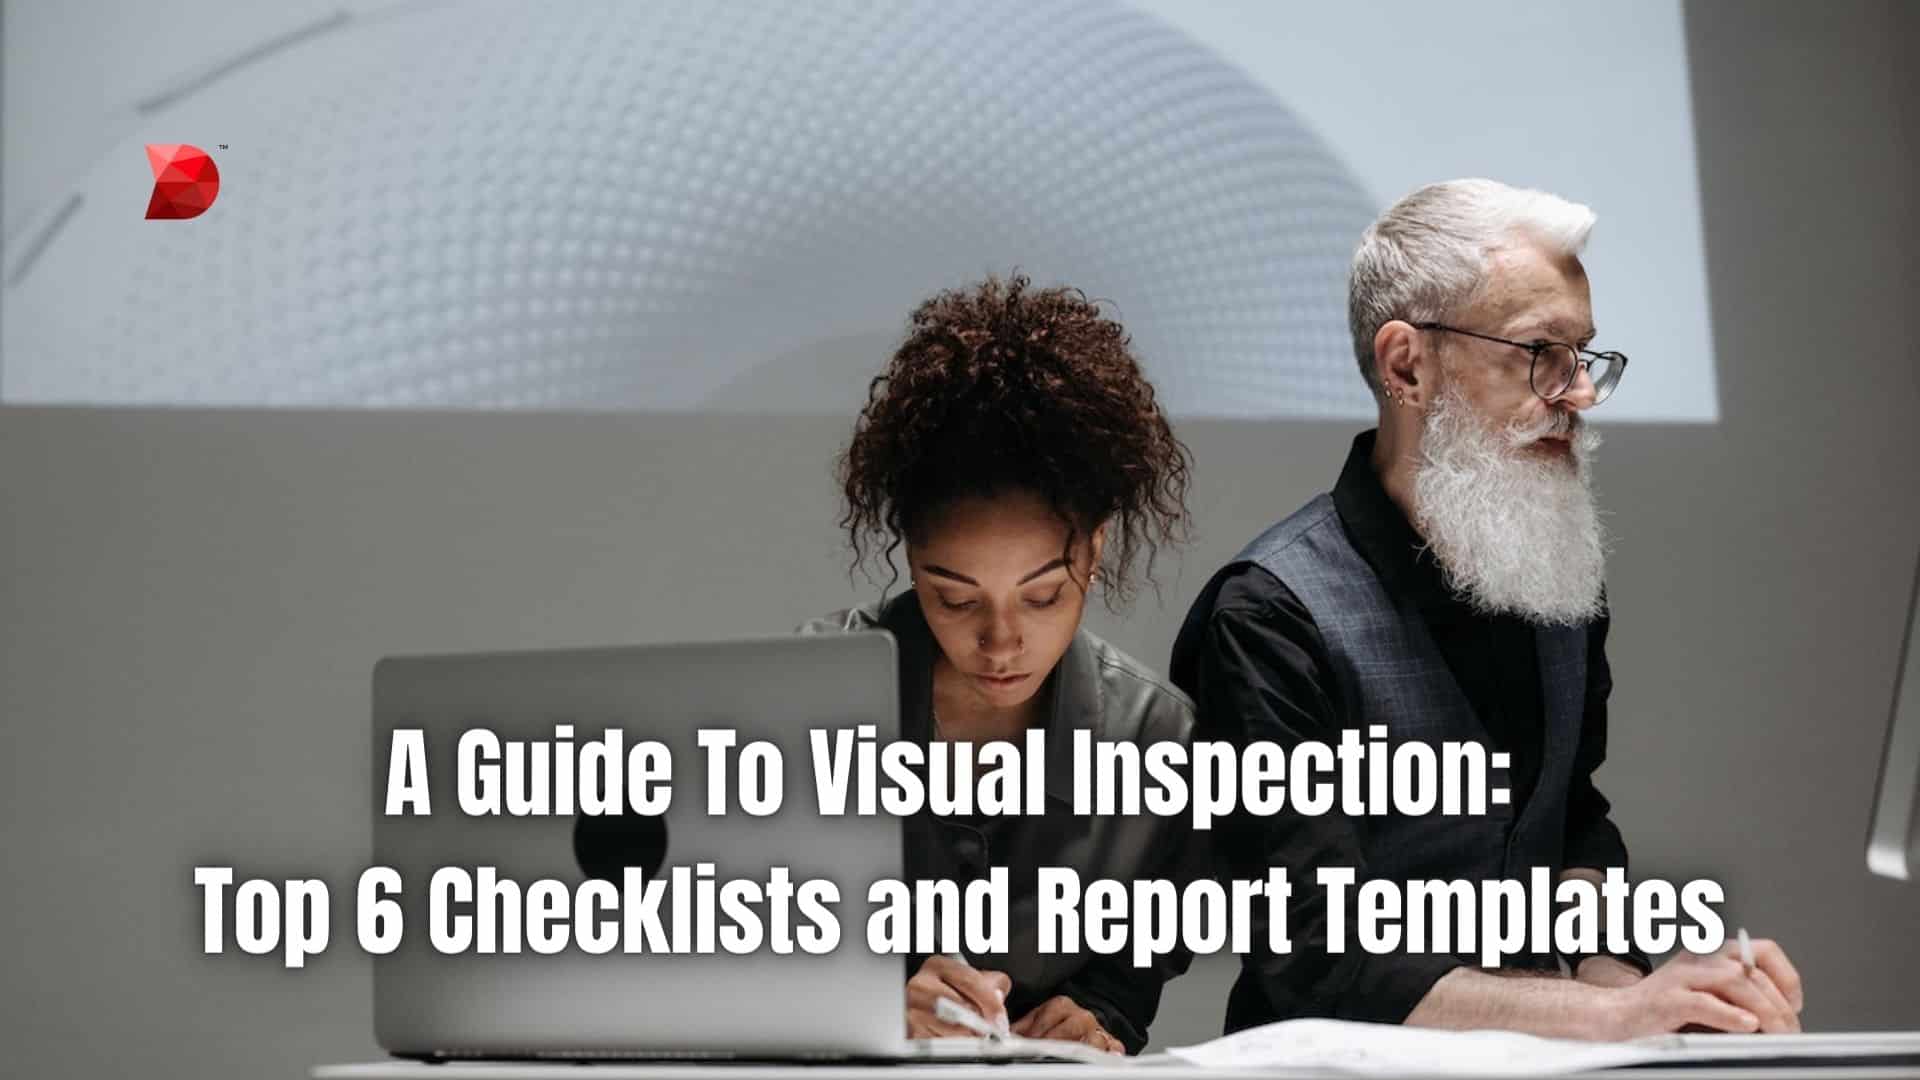 A Guide To Visual Inspection Top 6 Checklists and Report Templates